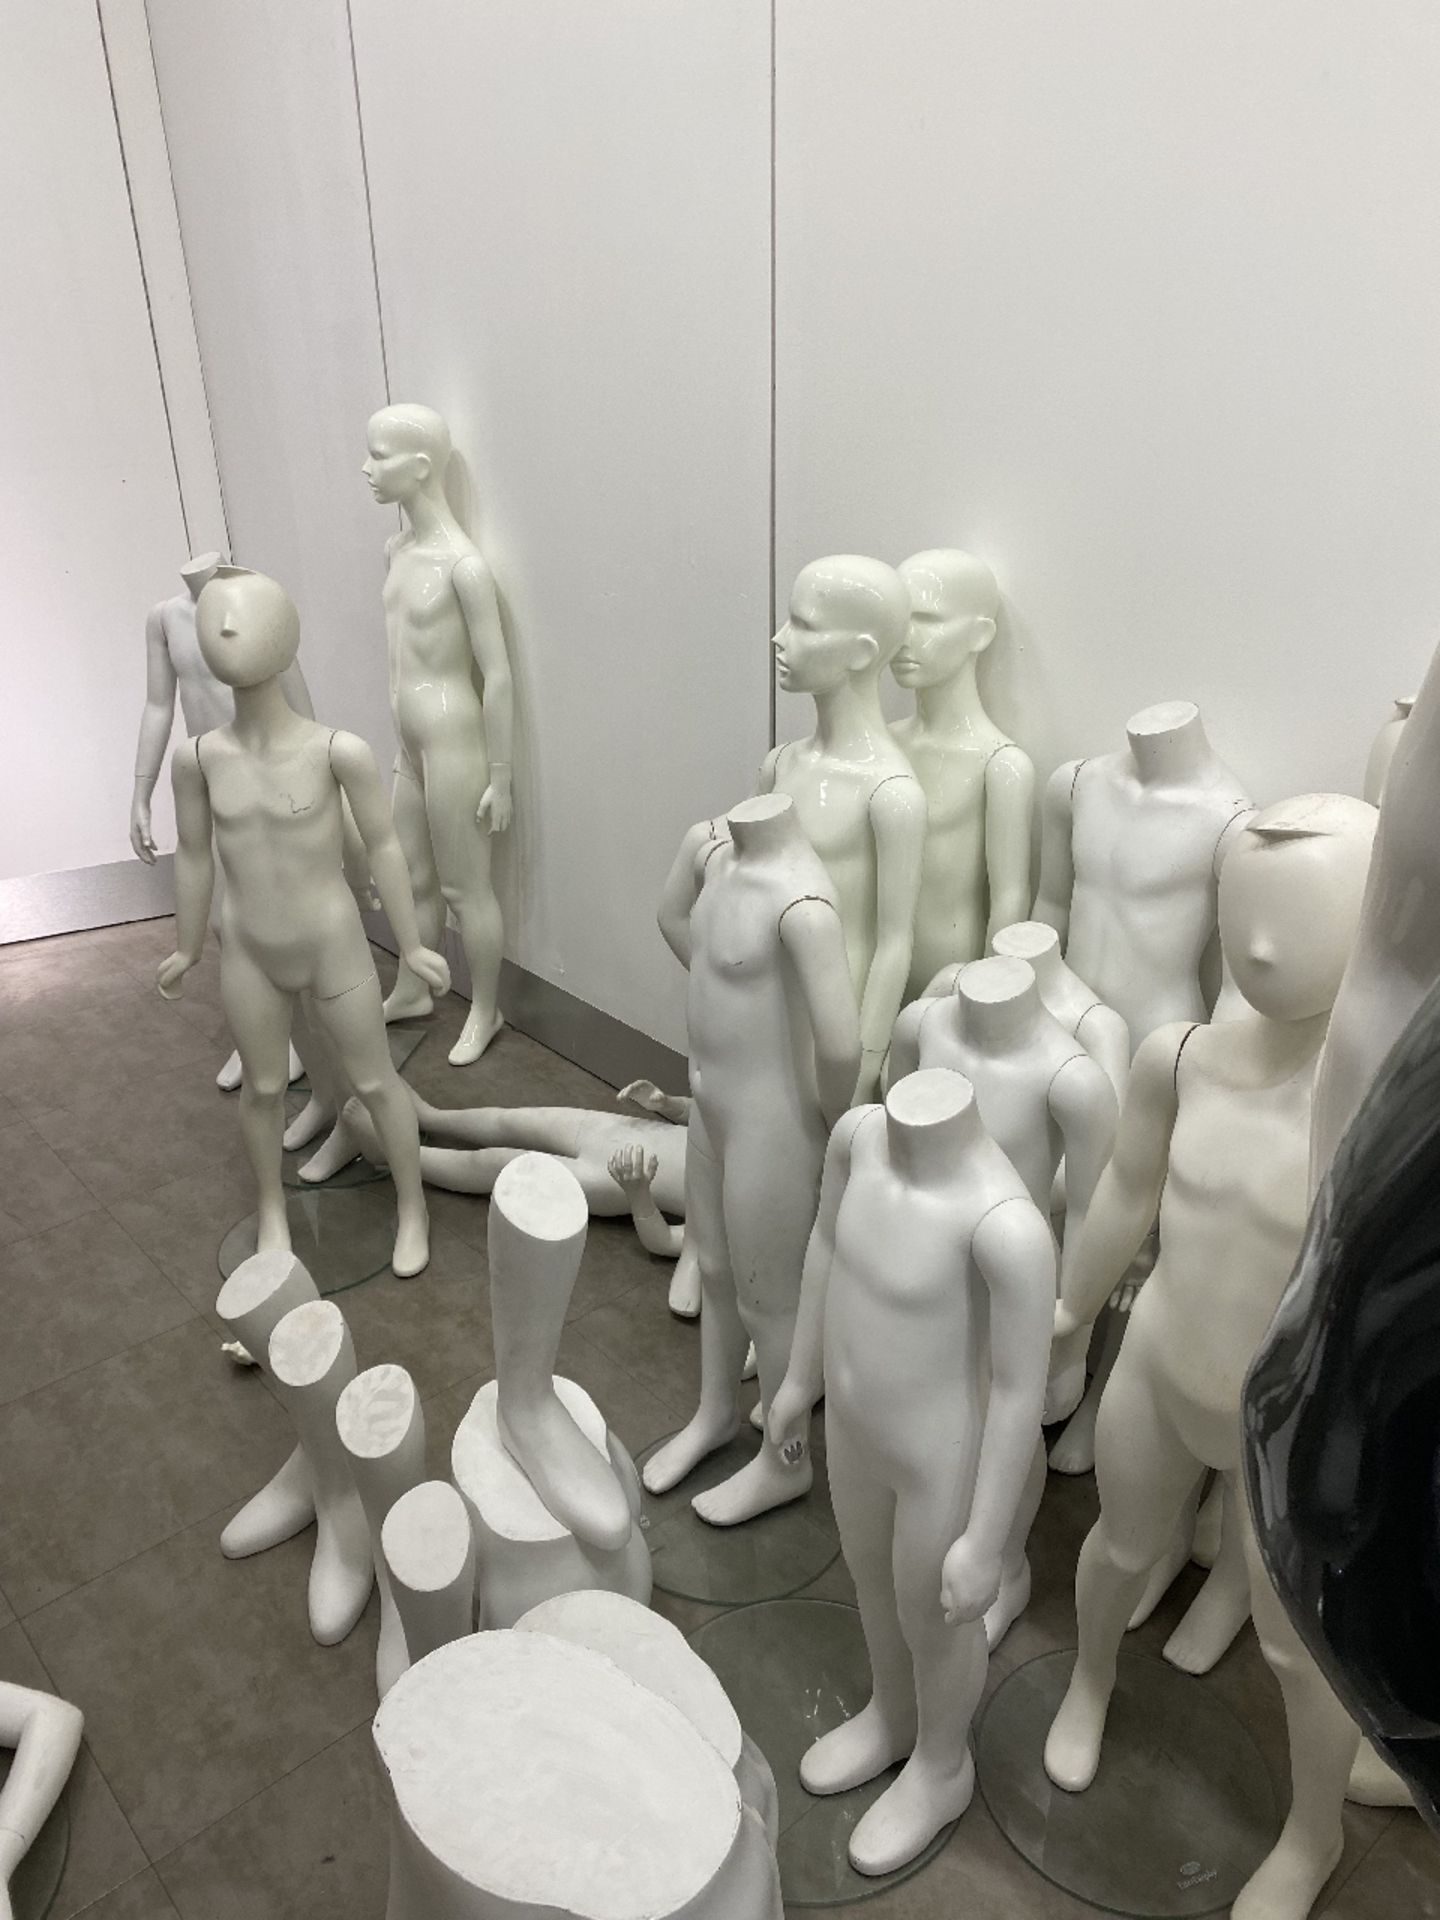 assortment of free standing mannequins - Image 2 of 3